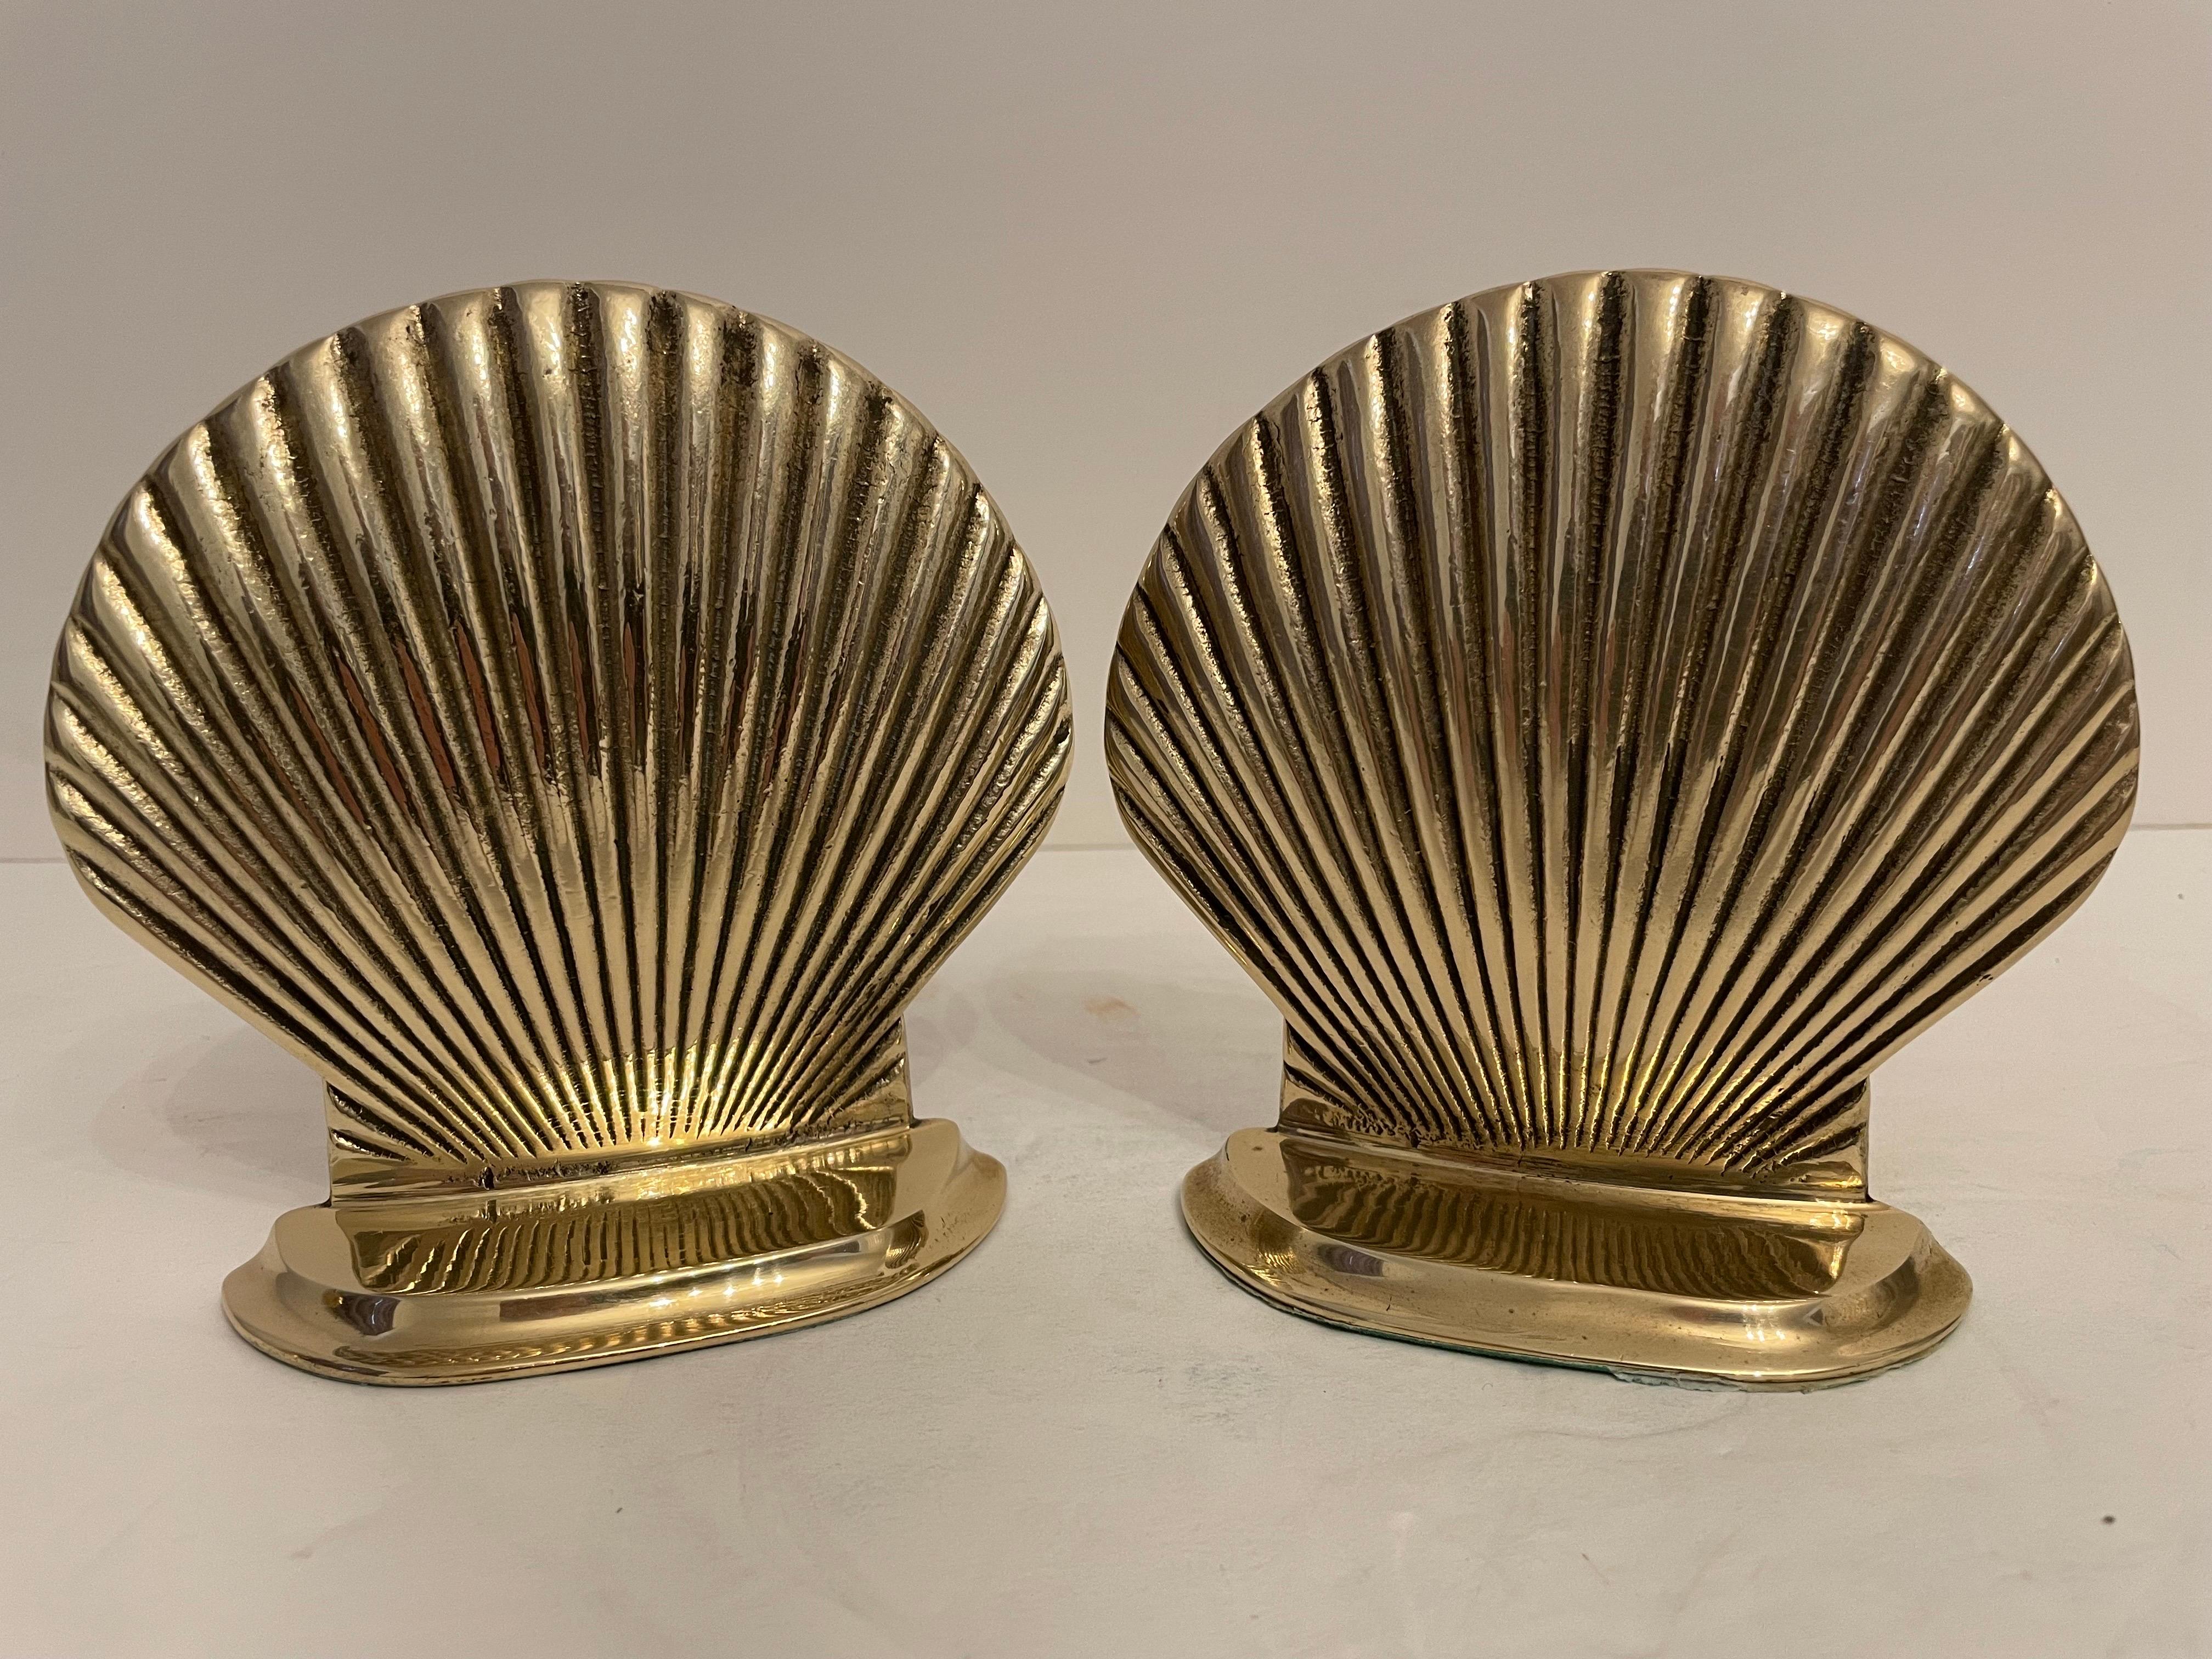 Vintage Brass Clam Shell Seashell Bookends In Good Condition For Sale In New York, NY